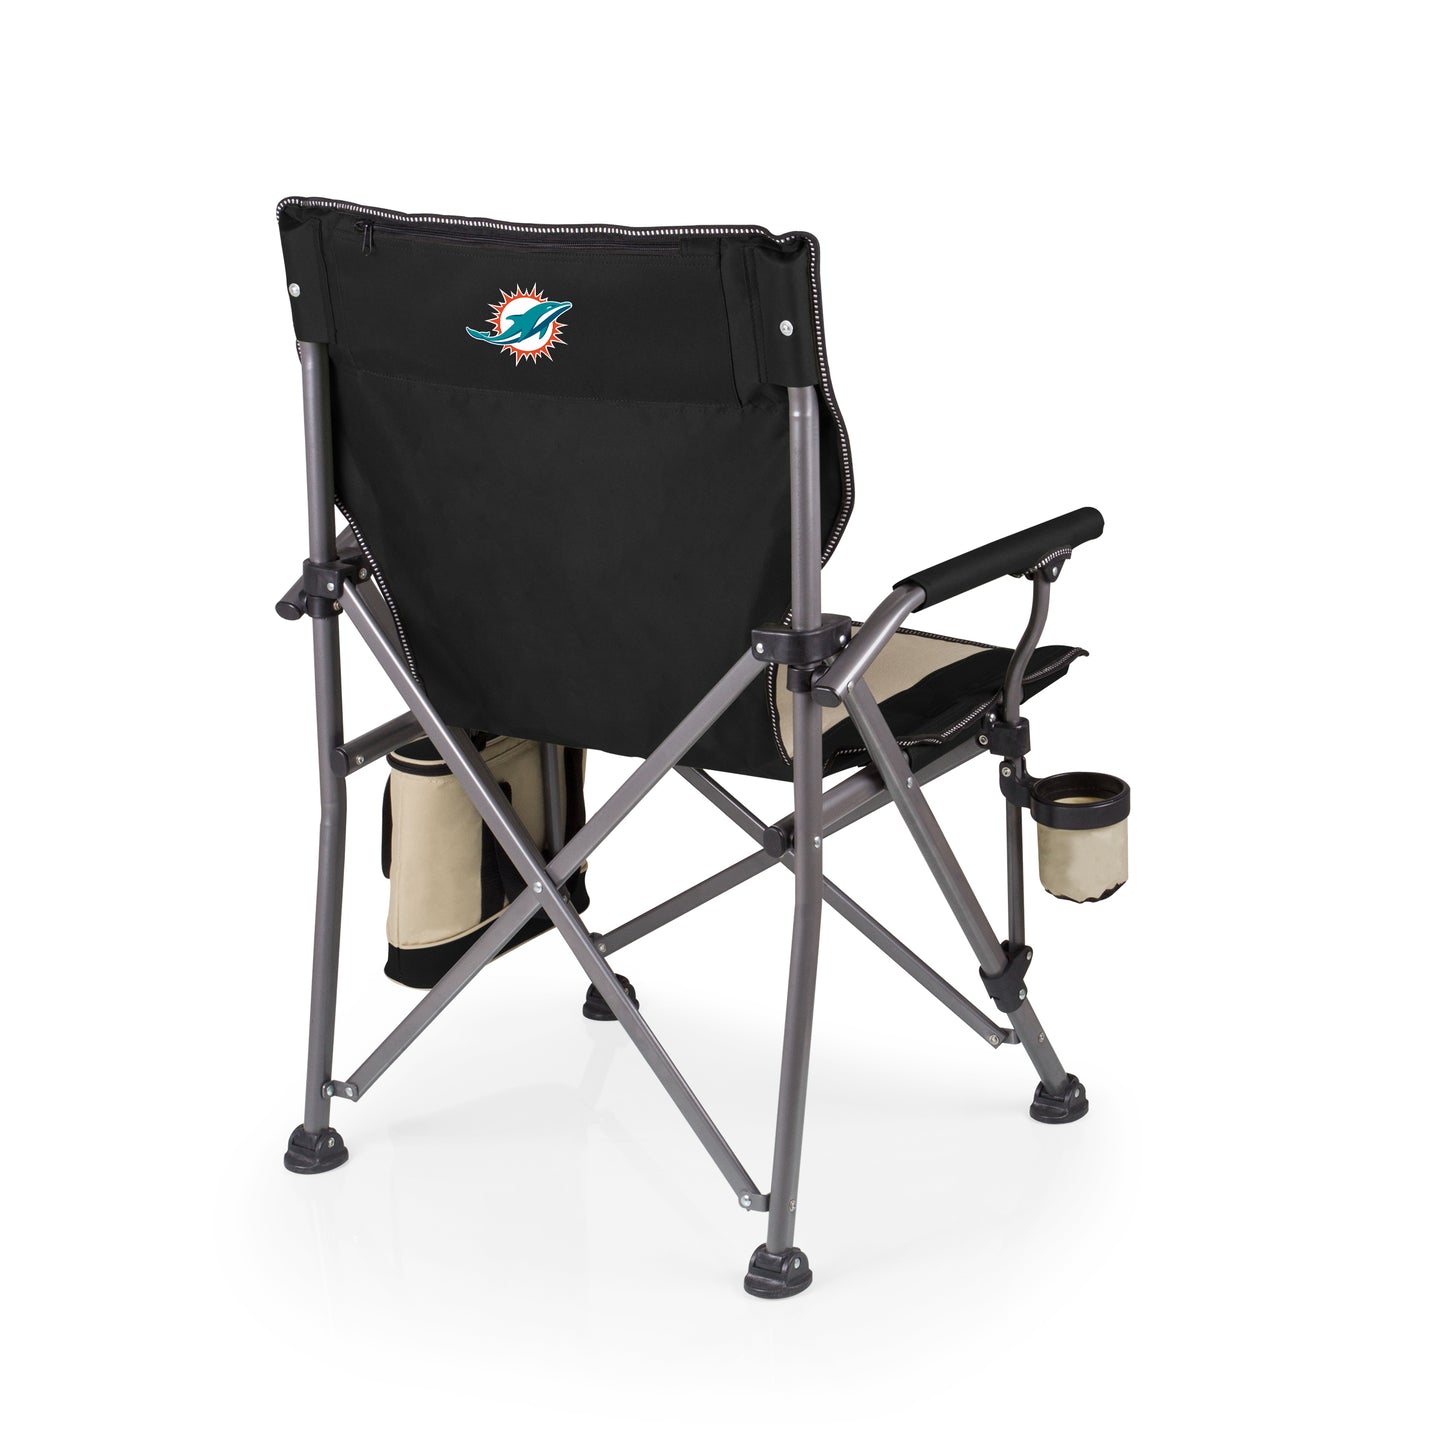 Miami Dolphins - Outlander Folding Camping Chair with Cooler